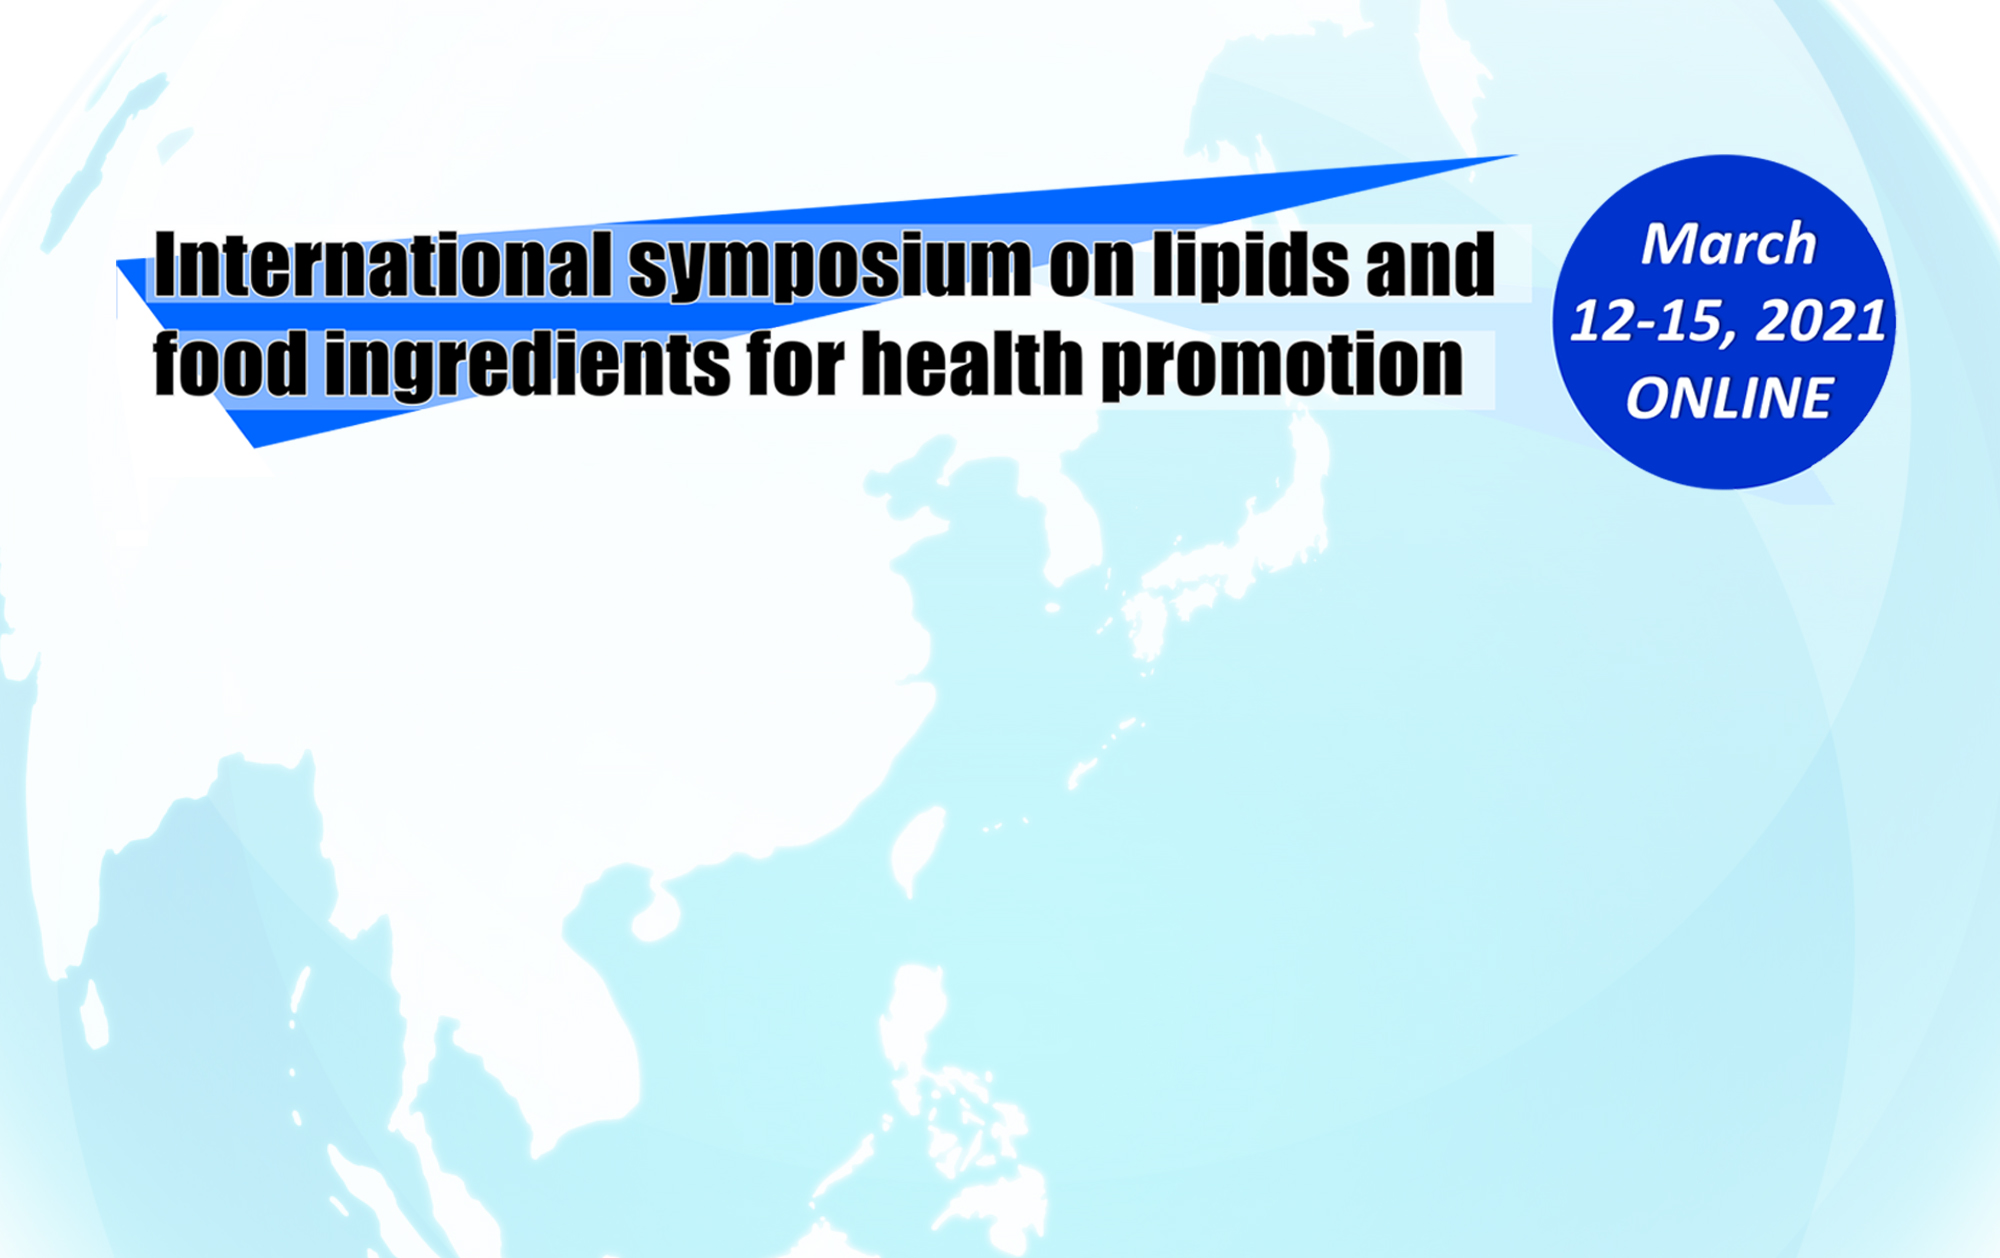 International symposium on lipids  and food ingredients for health promotion